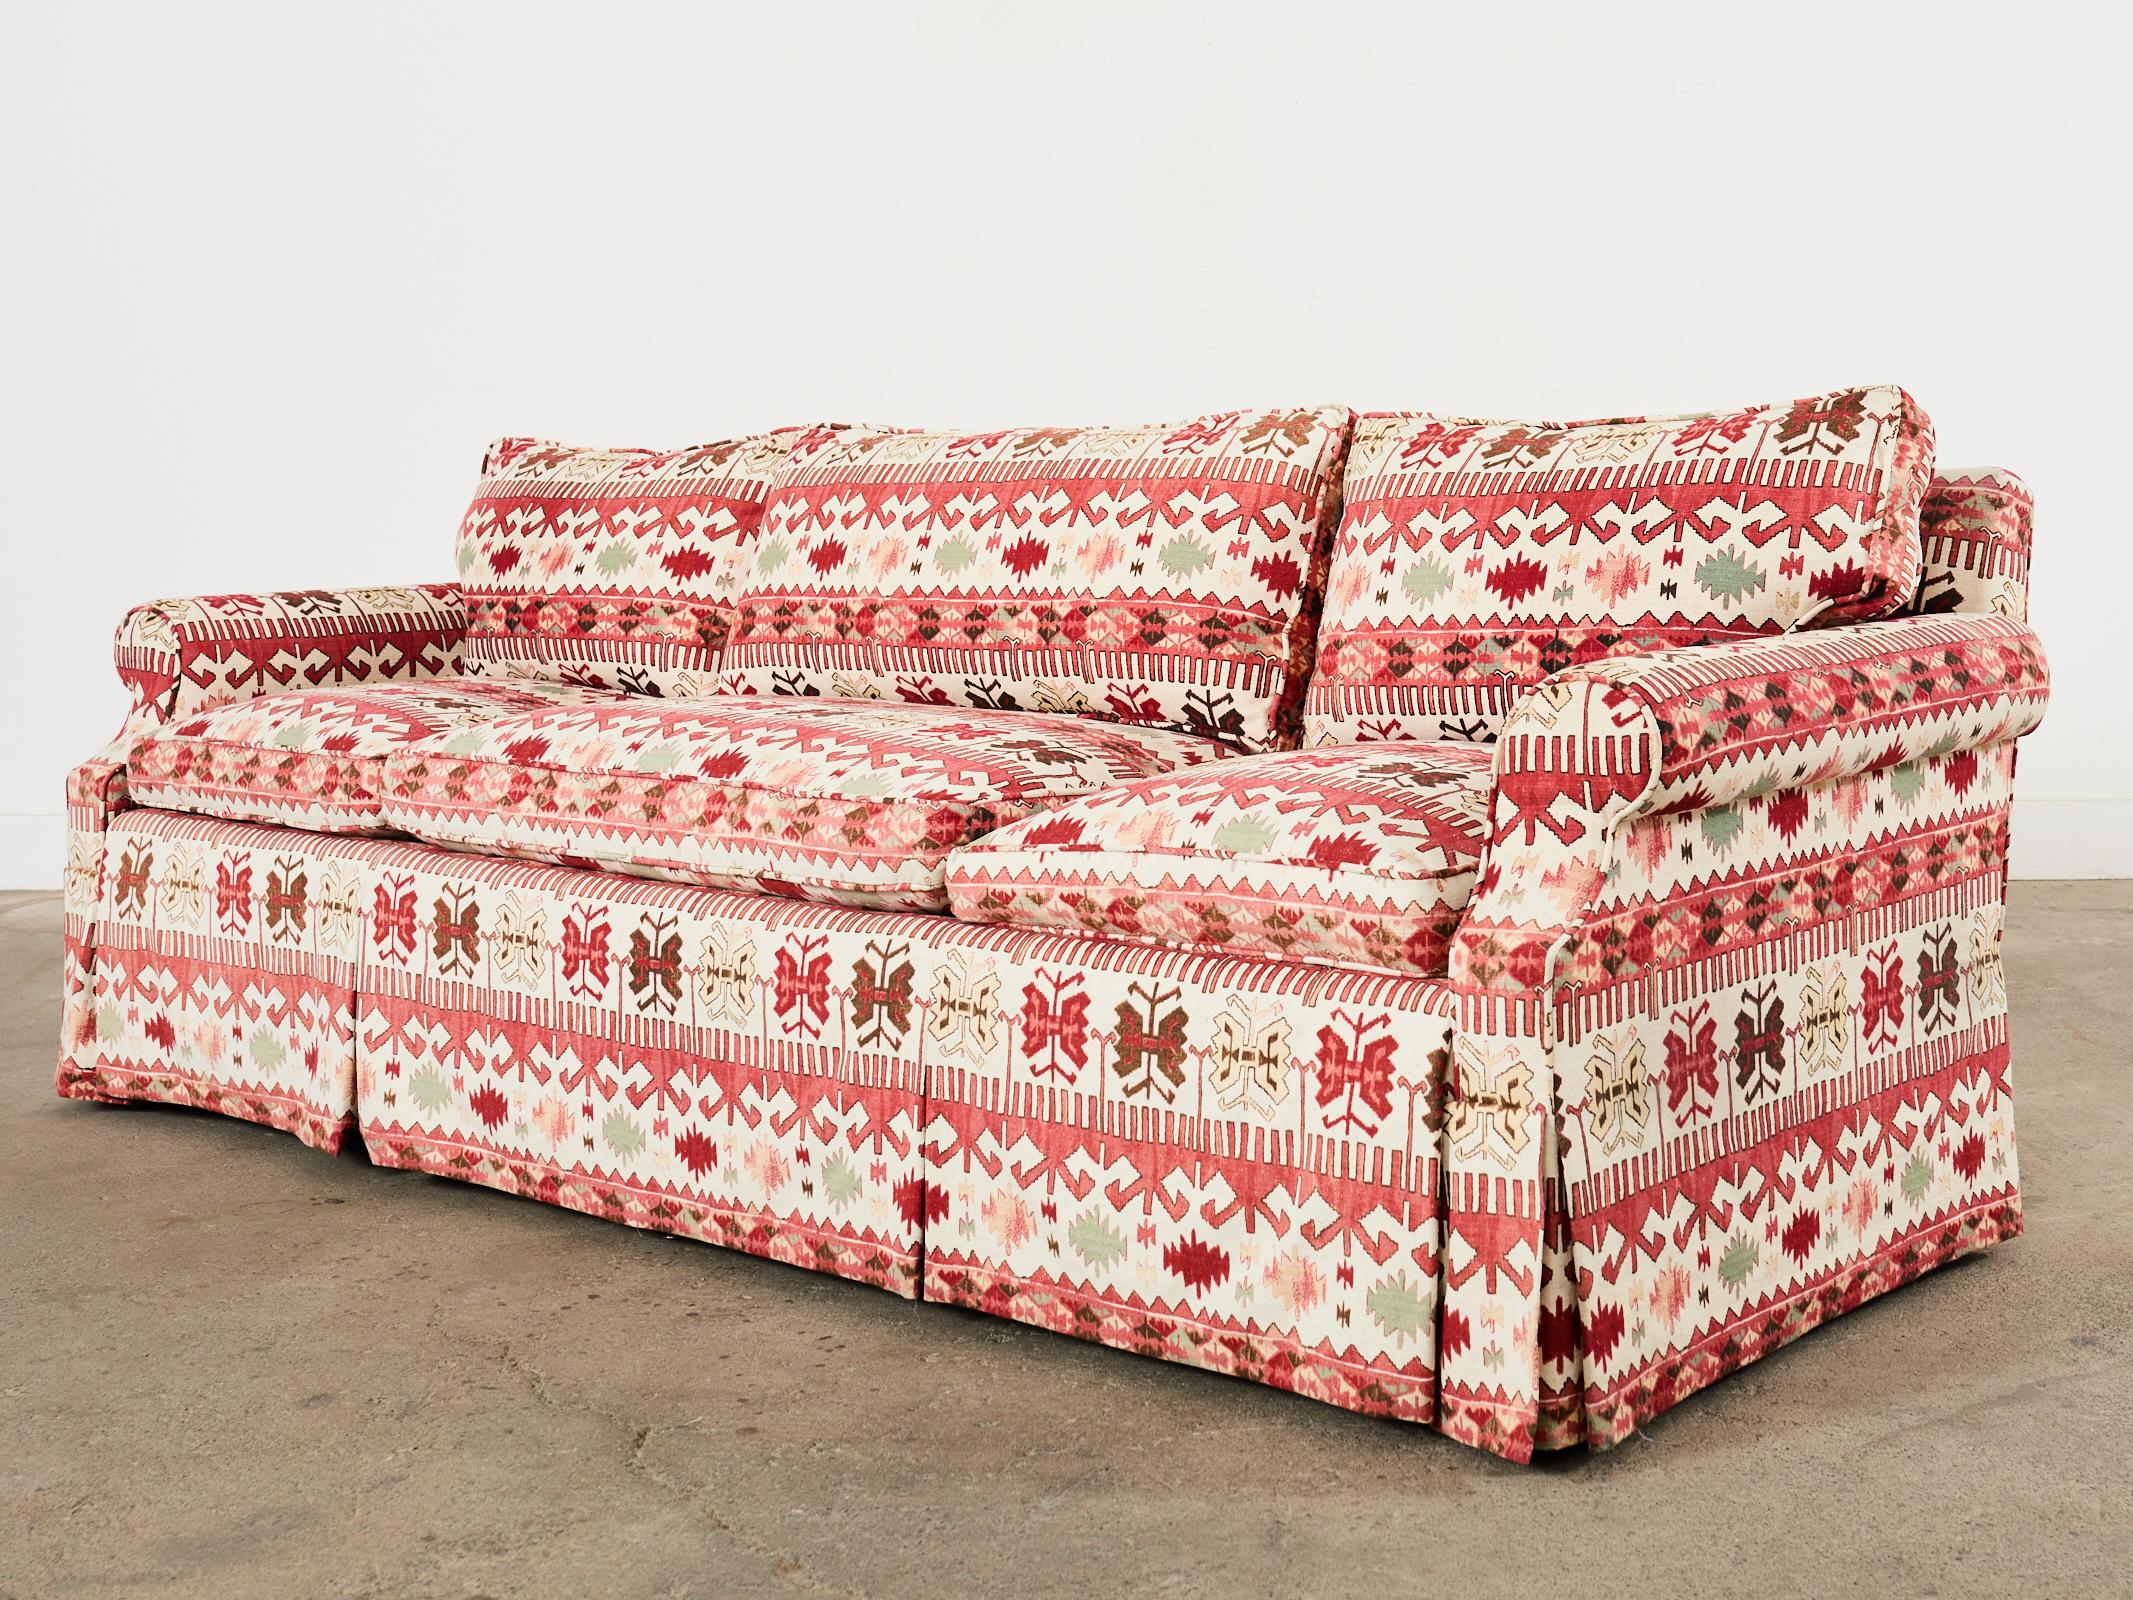 Hand-Crafted English George Smith Style Kilim Design Upholstered Sofa For Sale